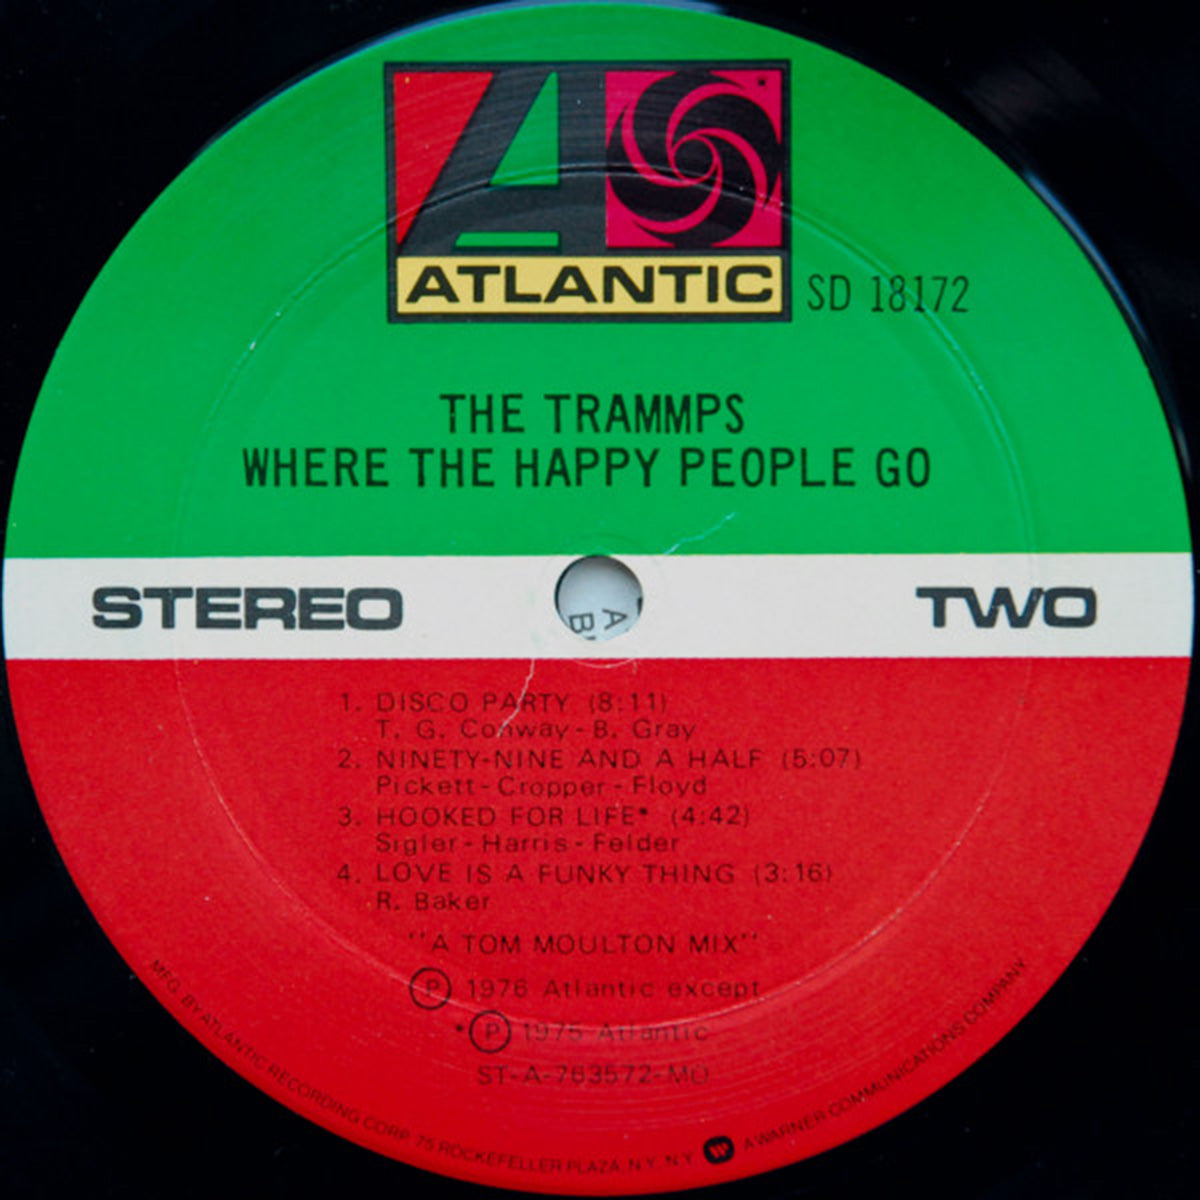 The Trammps – Where The Happy People Go - 1976 US Pressing